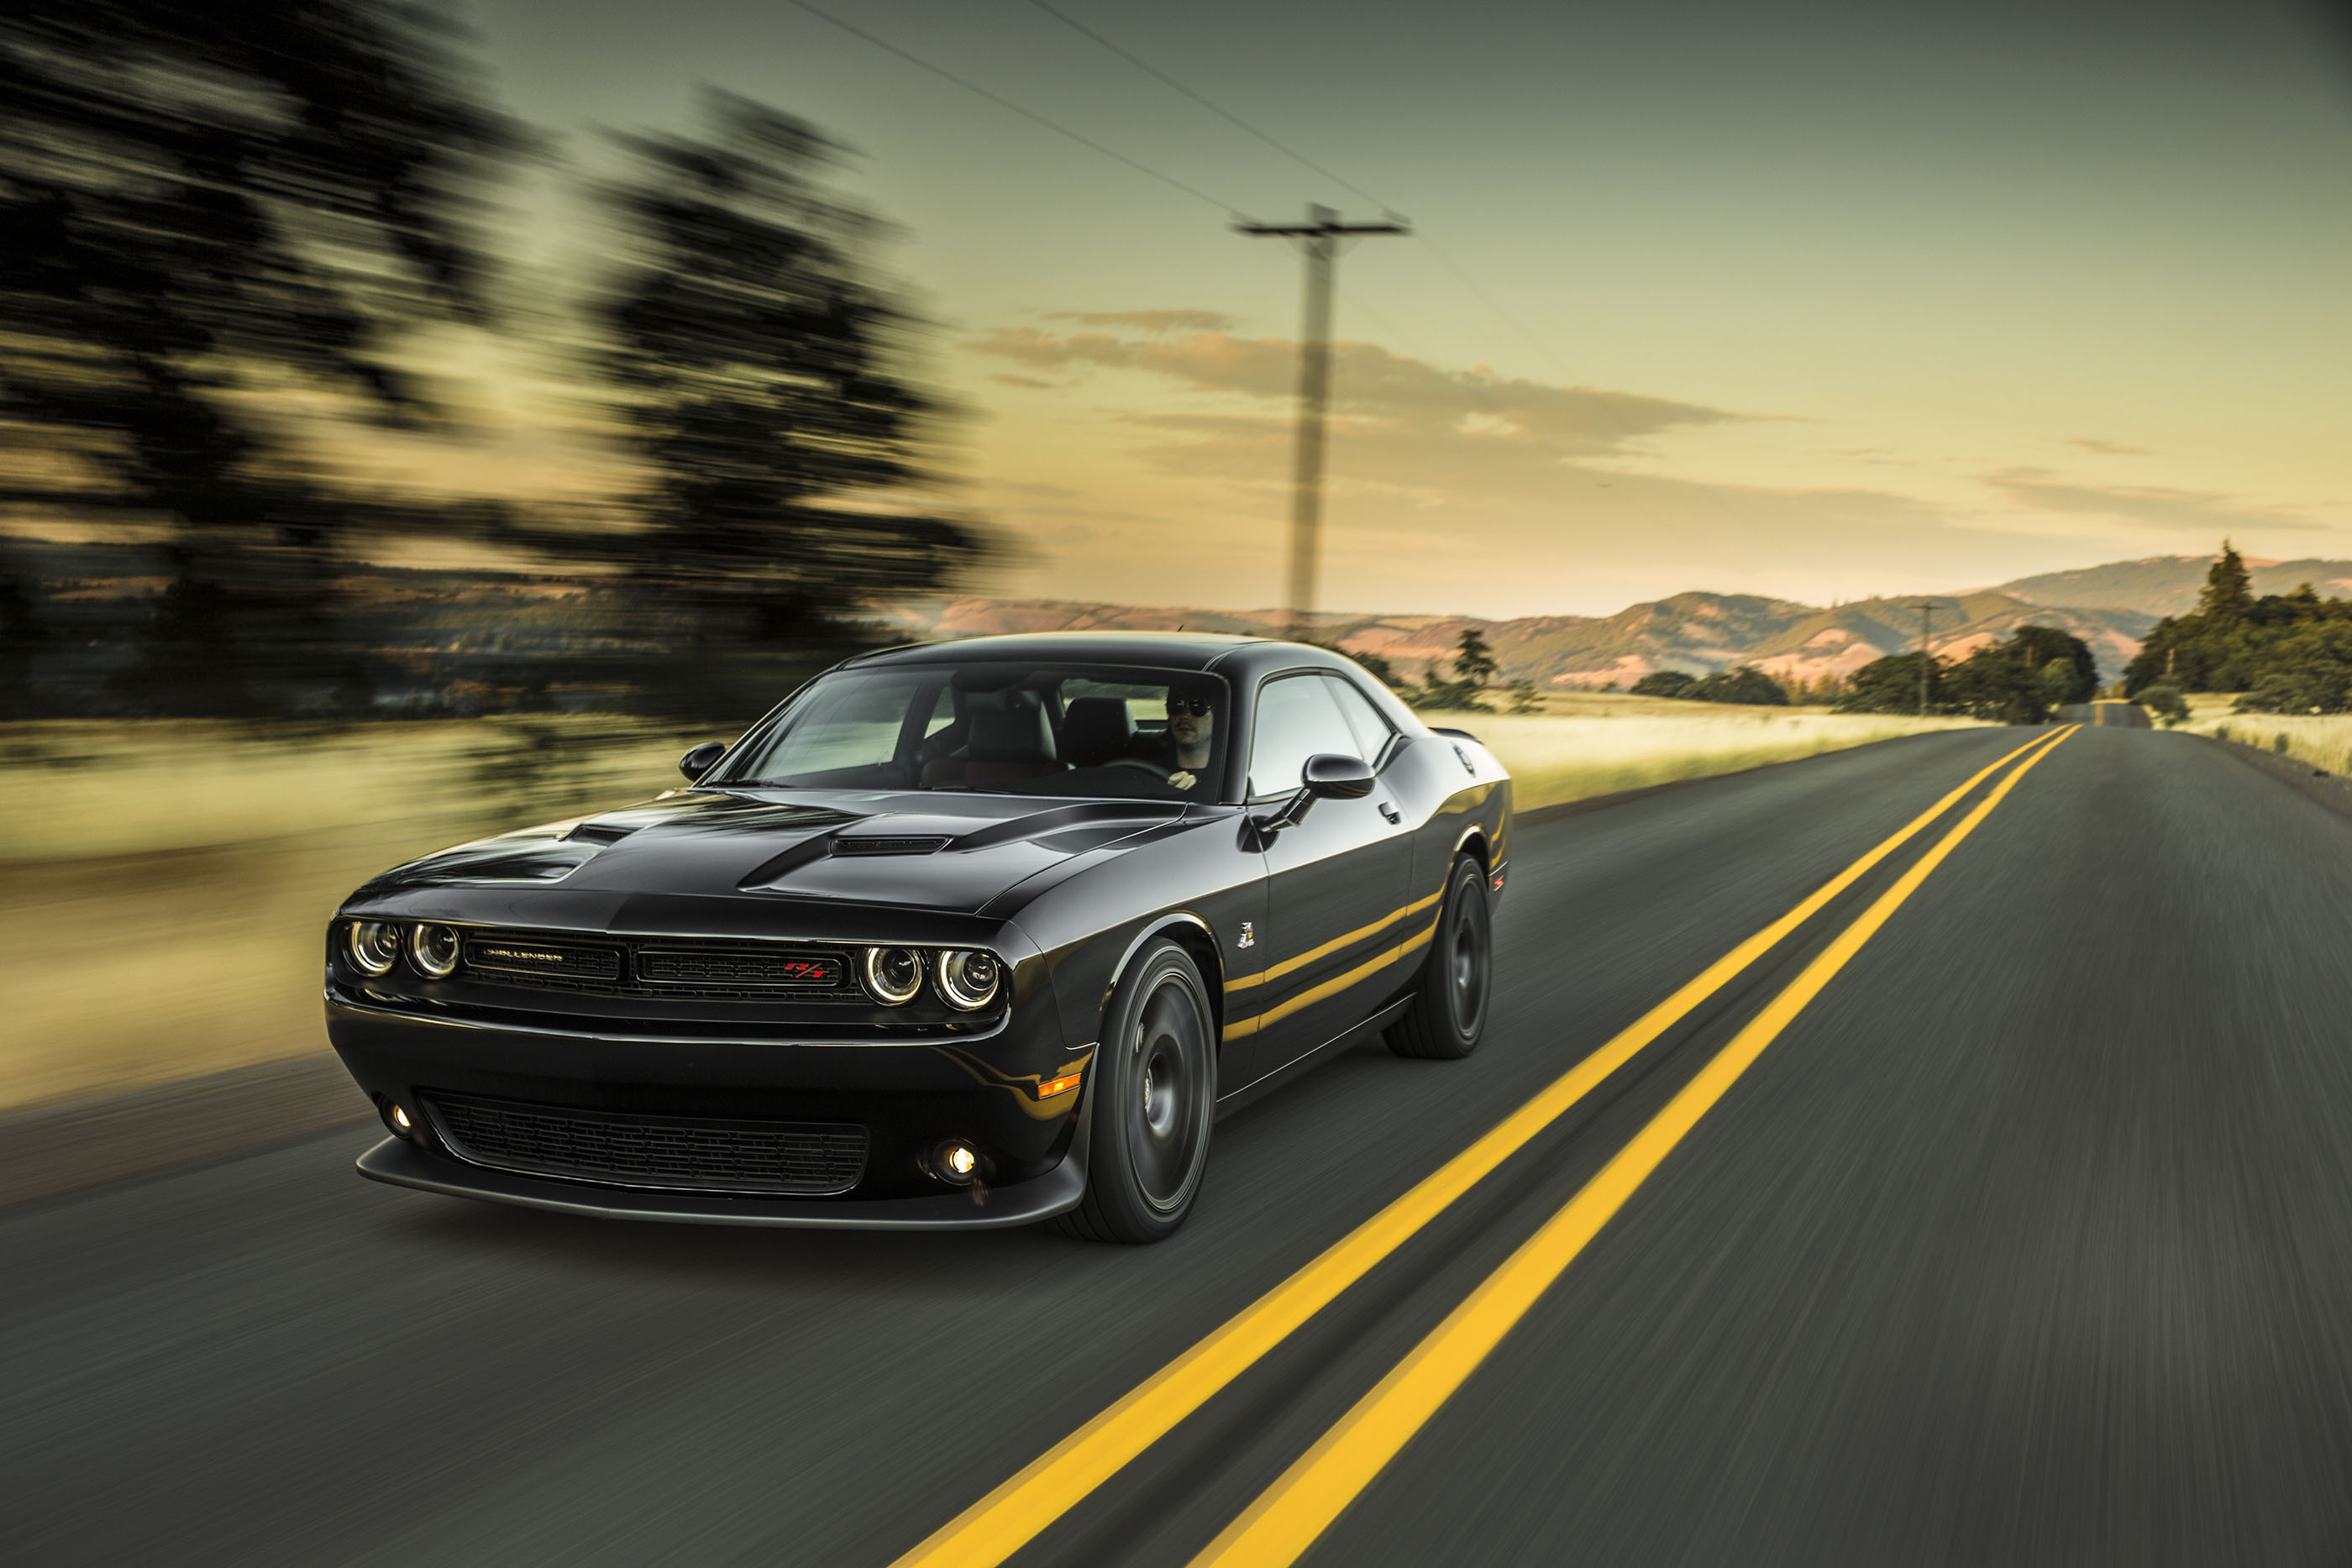 2017 Dodge Challenger, HD Cars, 4k Wallpapers, Images, Backgrounds